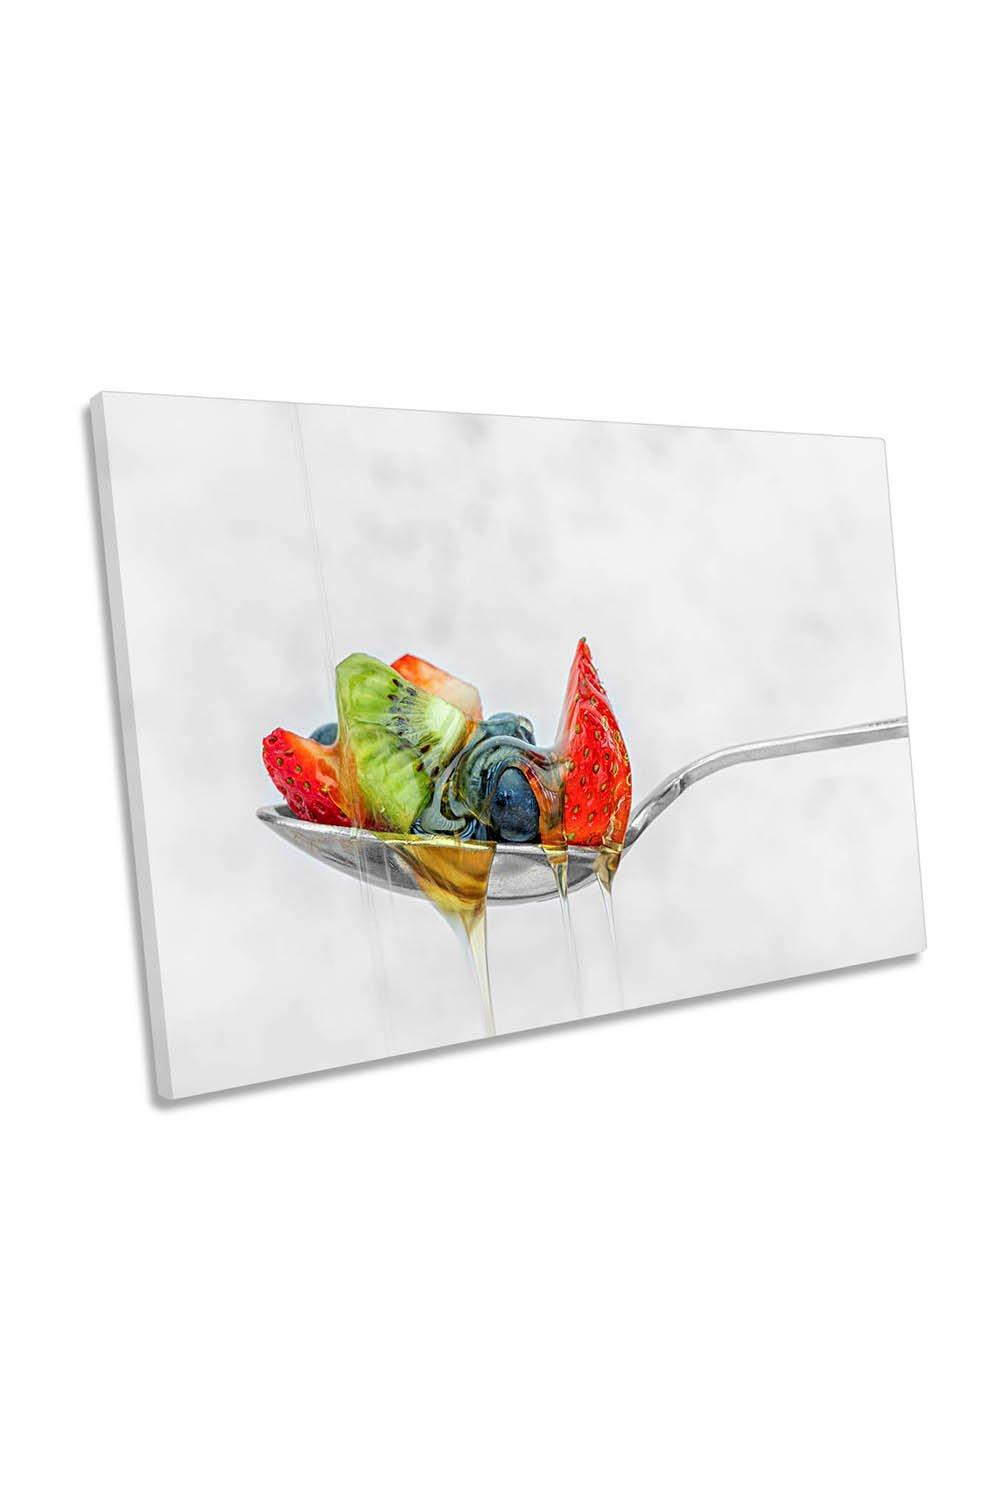 Oozing Deliciousness Fruit Spoon Kitchen Canvas Wall Art Picture Print